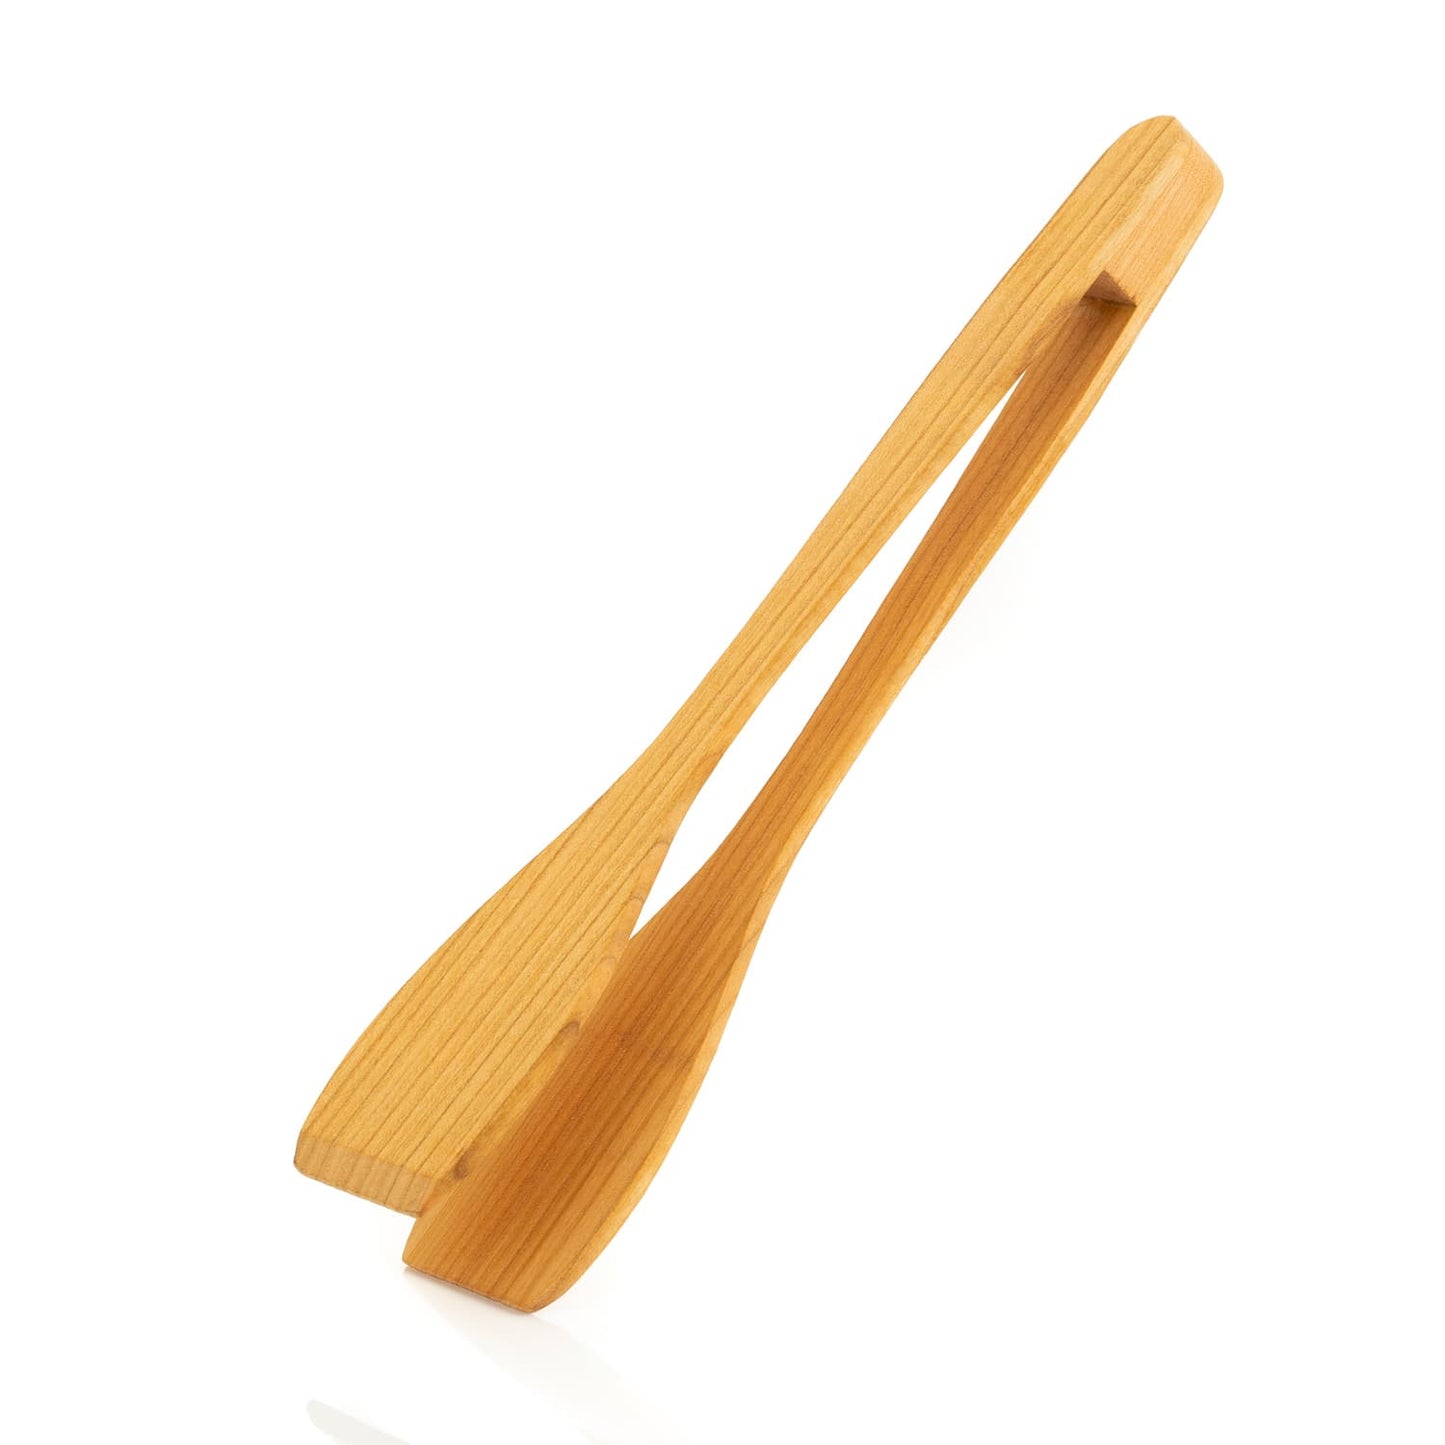 Mr. Woodware - Professional Cherry Wood Kitchen Tongs